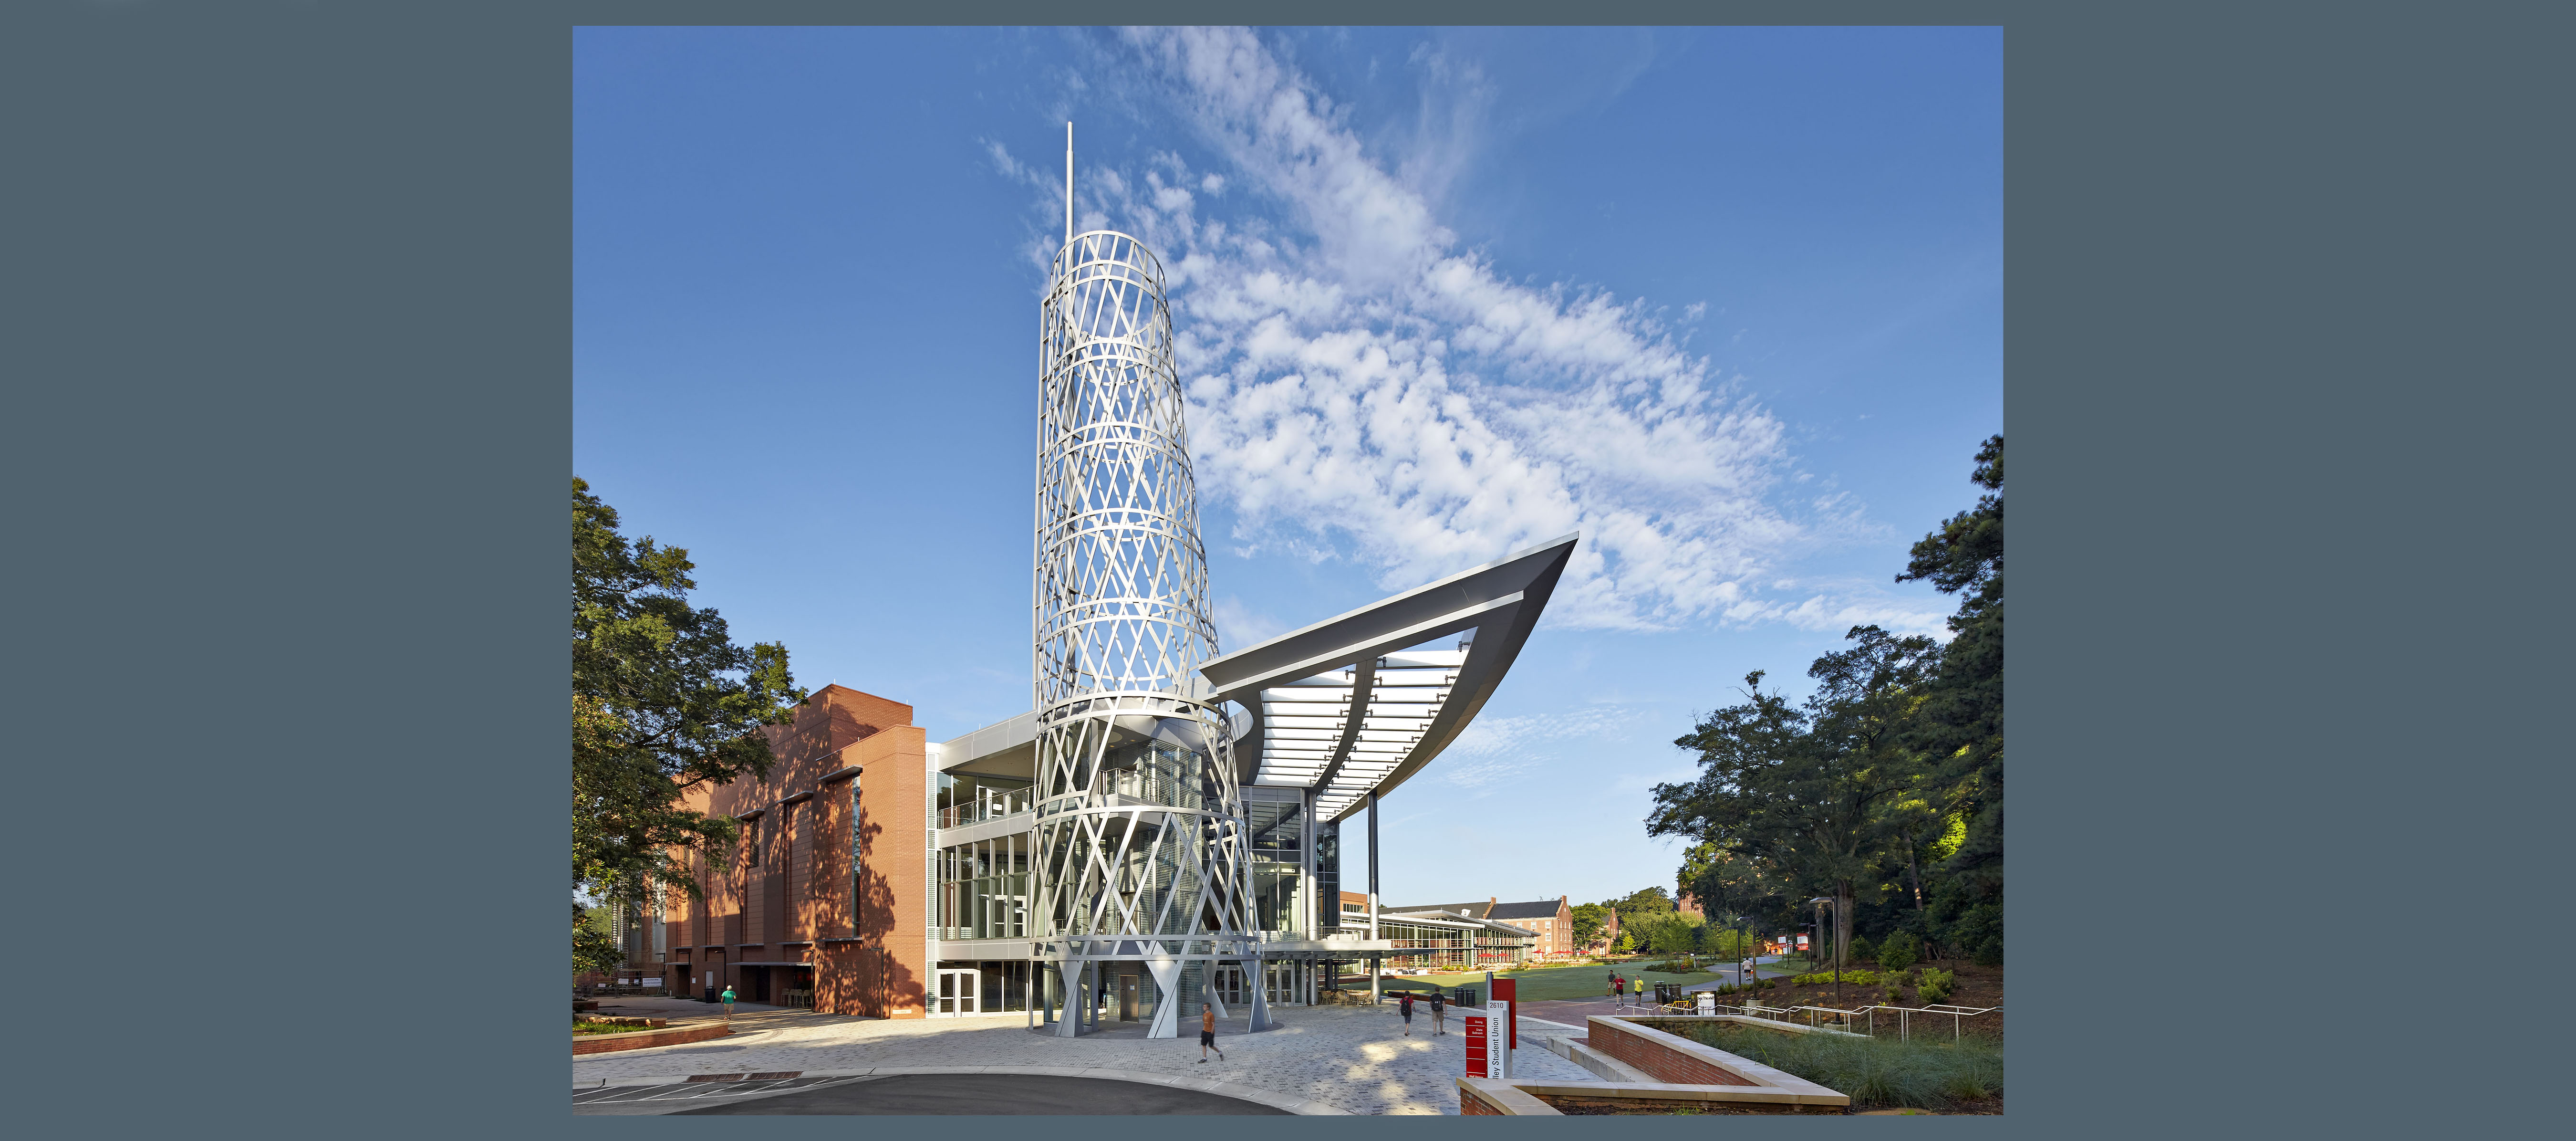 Stewart wins ACEC Grand Award for Talley Student Union at NCSU